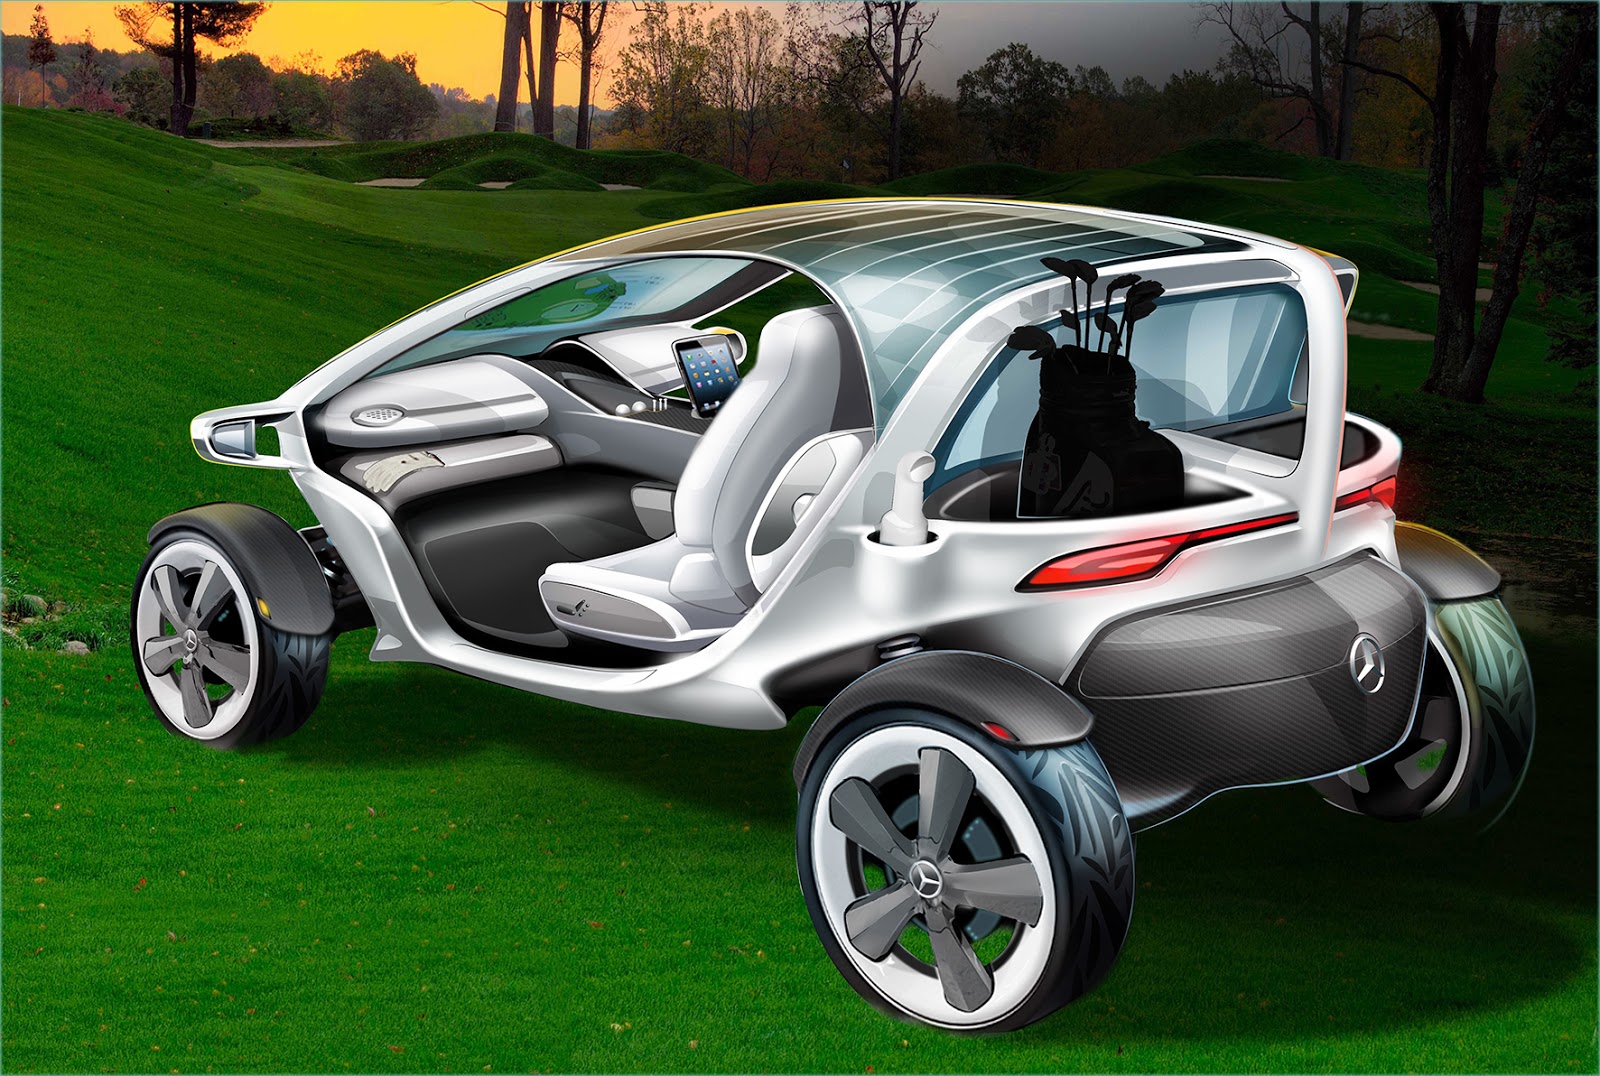 Find New 2014 Golf Carts Price And Pictures Model on newreviewcar.info